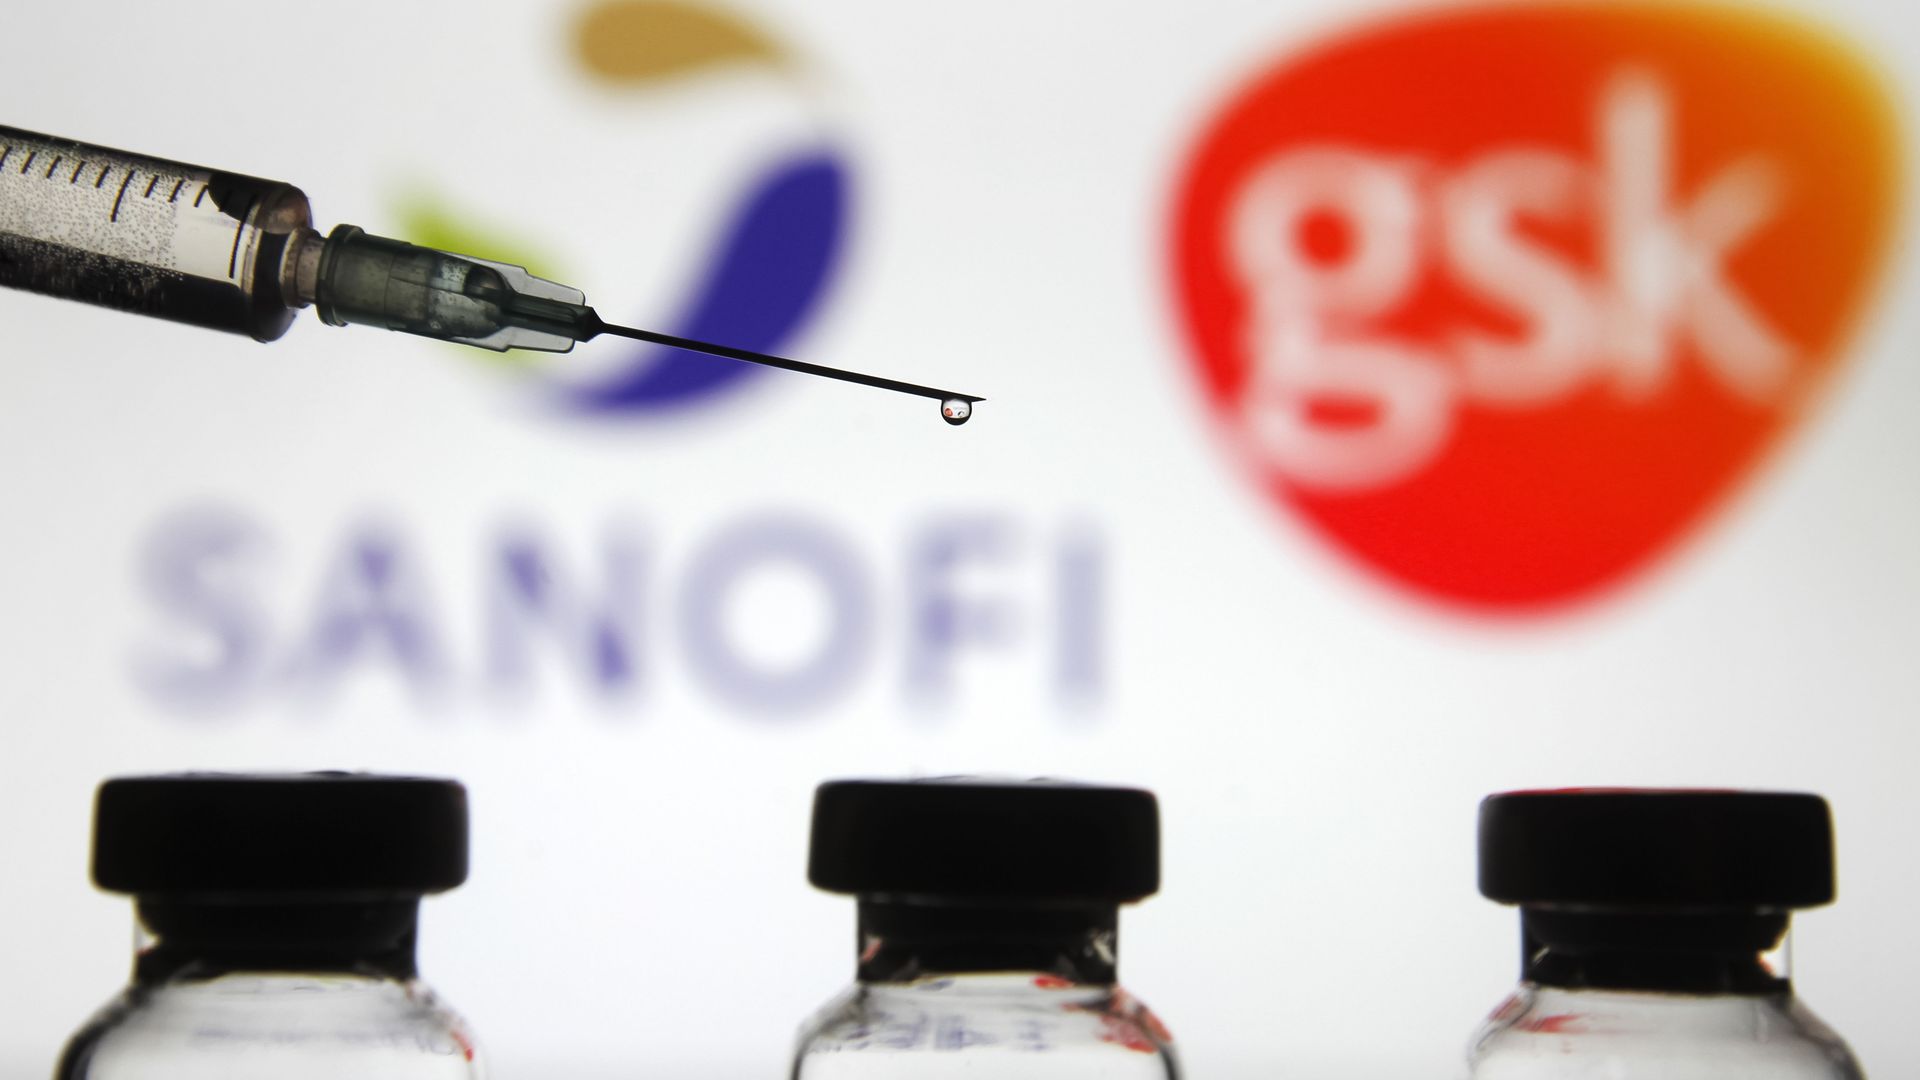 Sanofi and GSK signs in front of a syringe and vials.